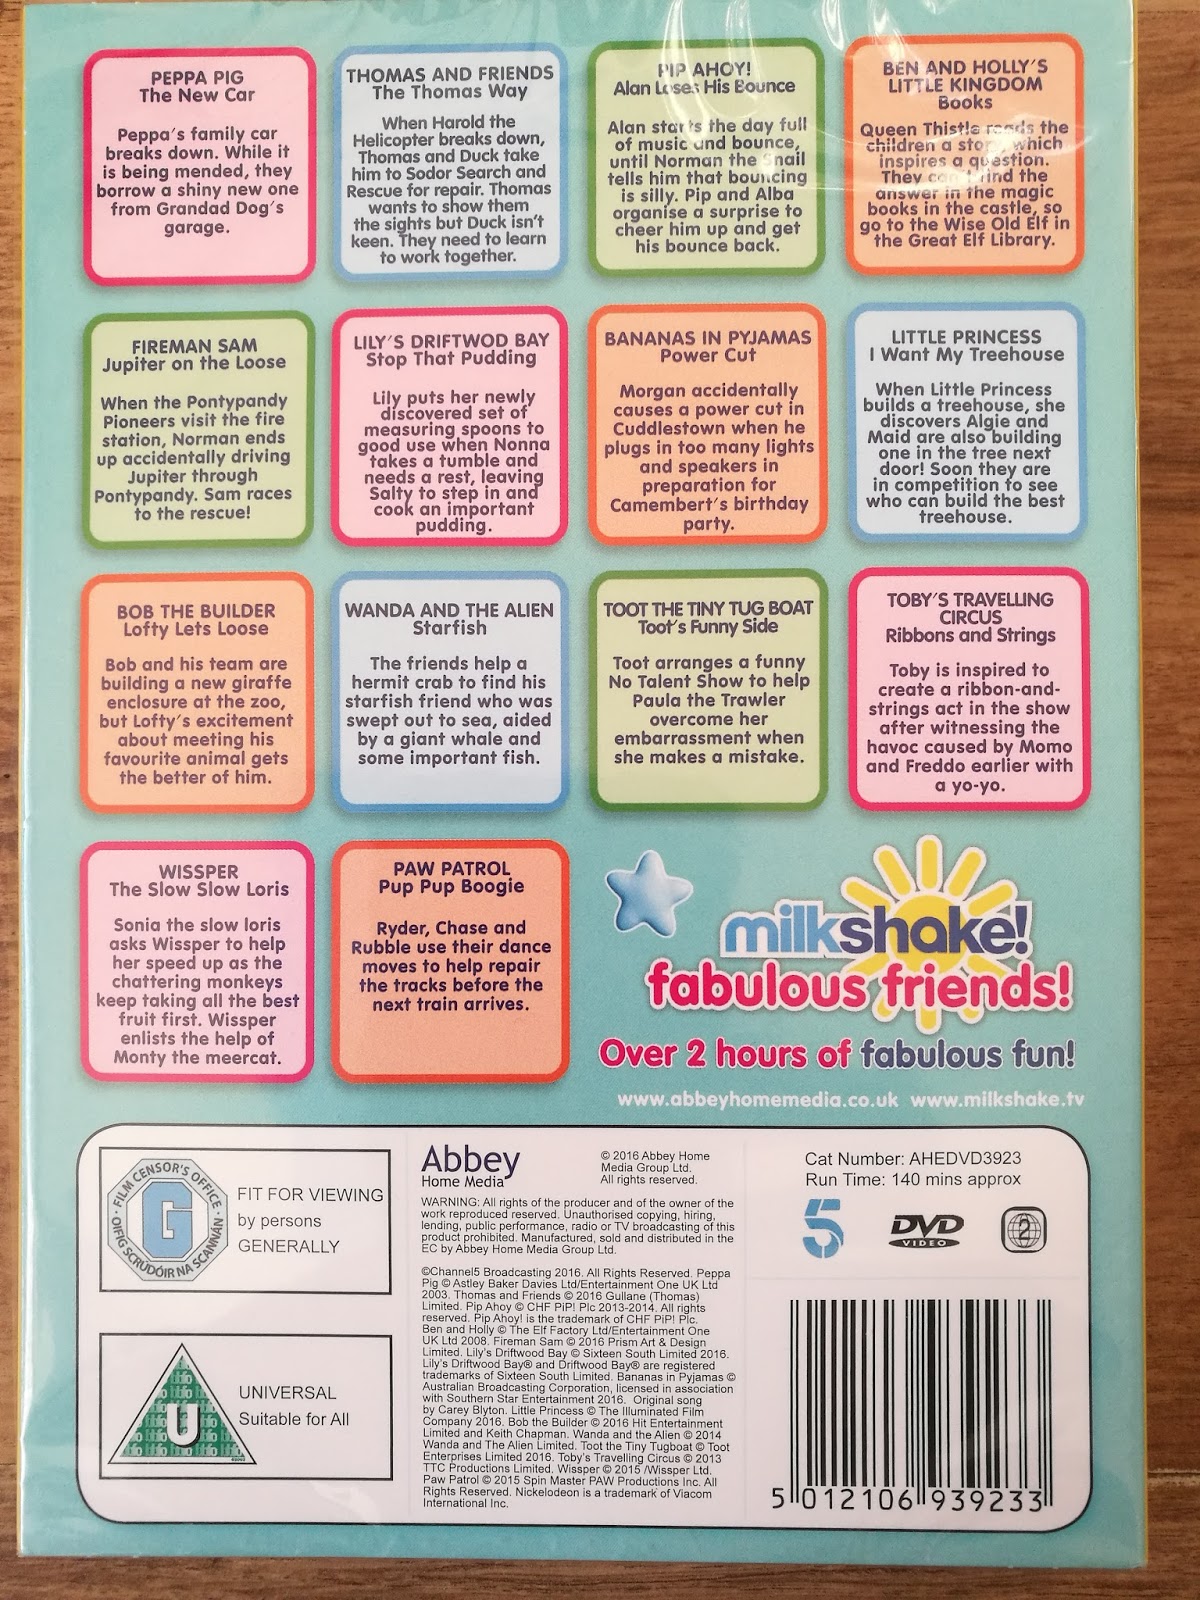 A Day In This Dad's Life: Milkshake! Fabulous Friends DVD Review